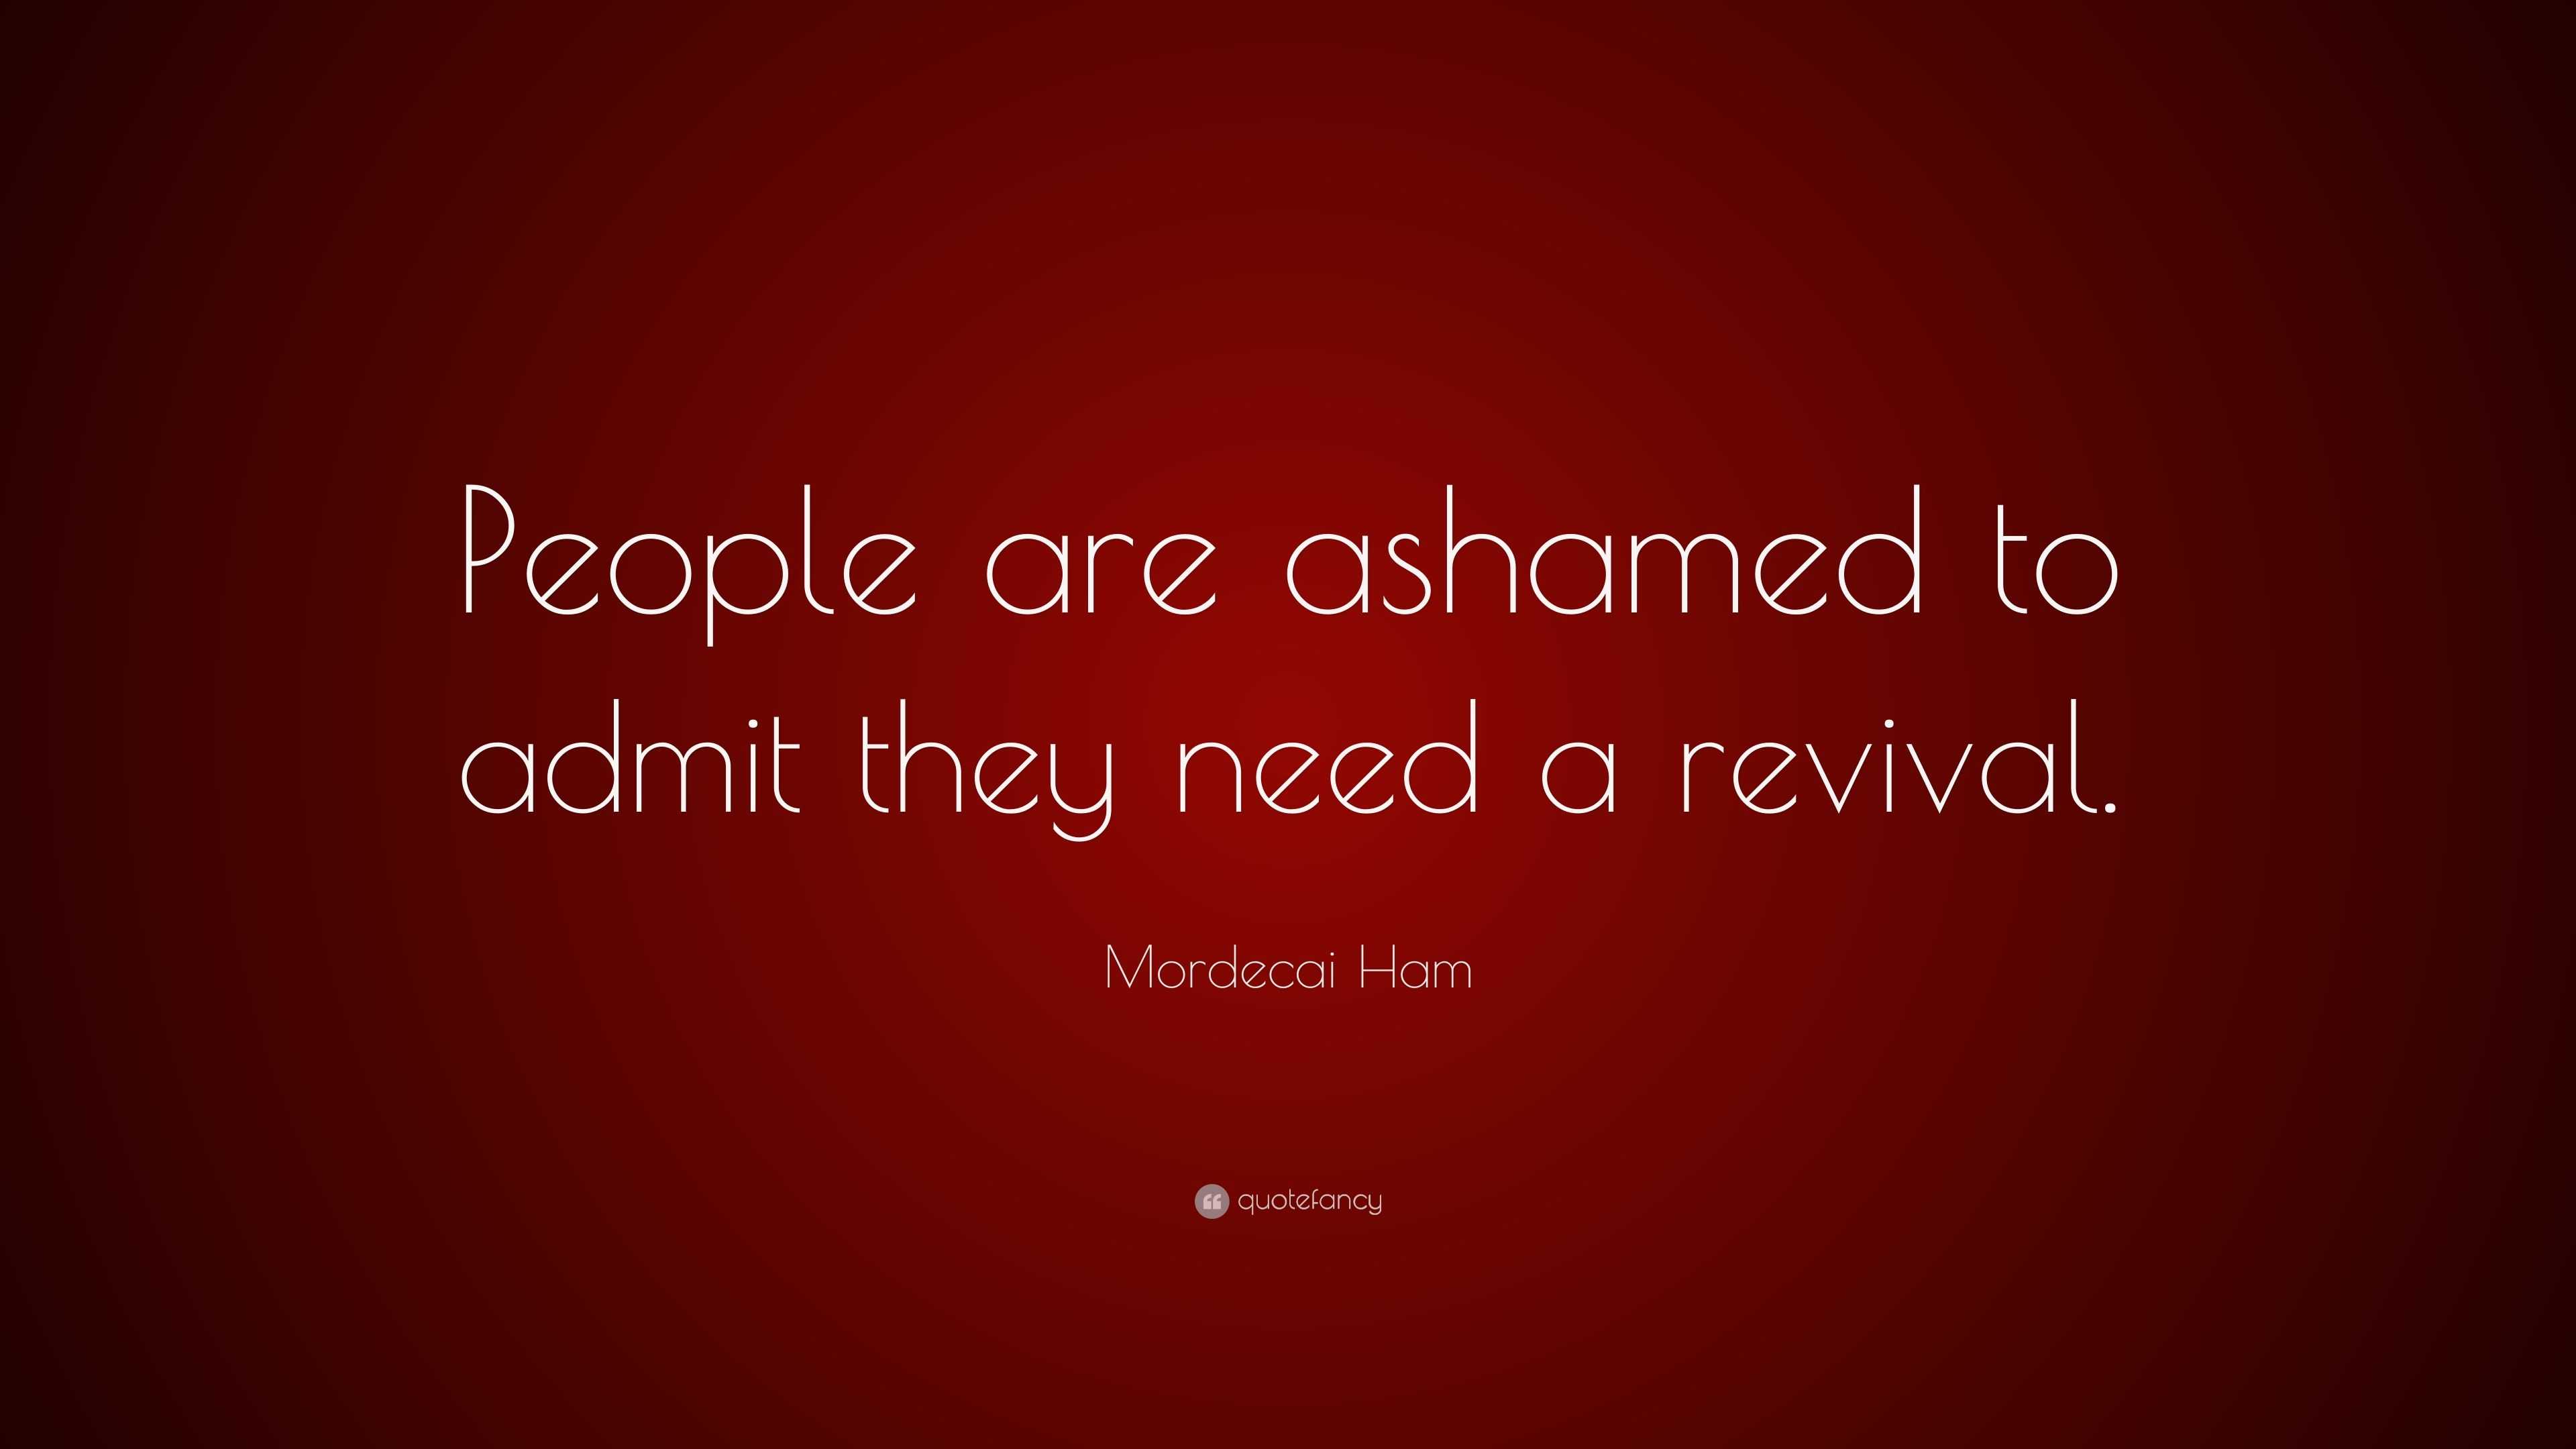 Mordecai Ham Quote: “People are ashamed to admit they need a revival.”